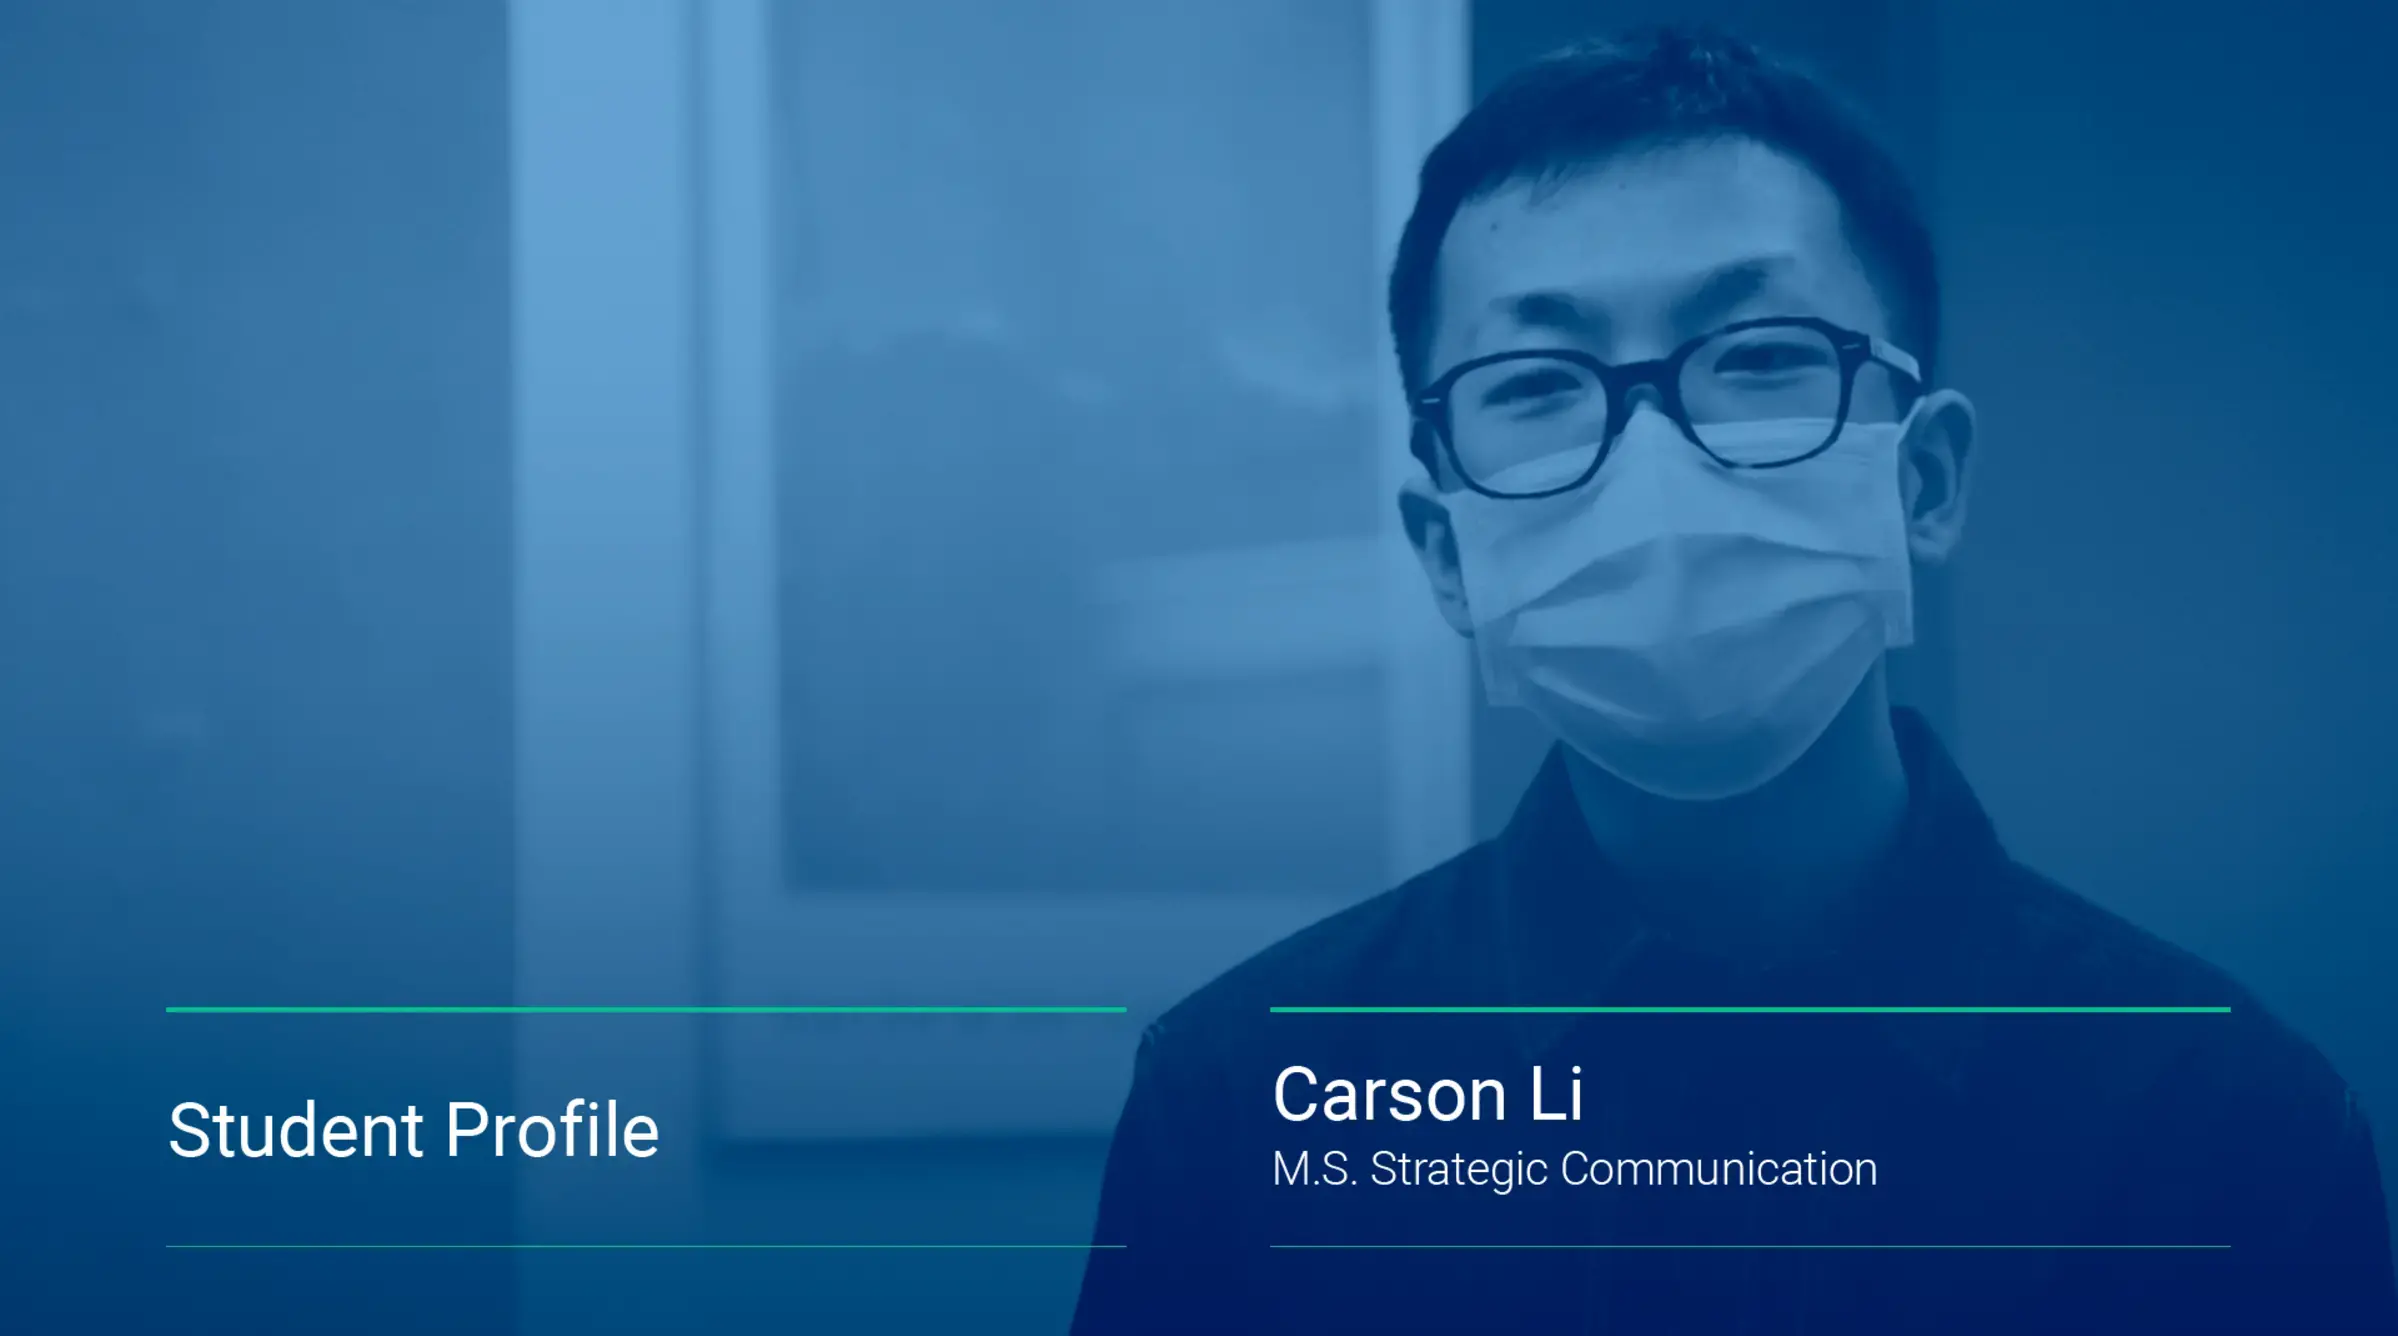 An image displays a still from a video interview featuring Carson Li, '21SPS, Strategic Communication.